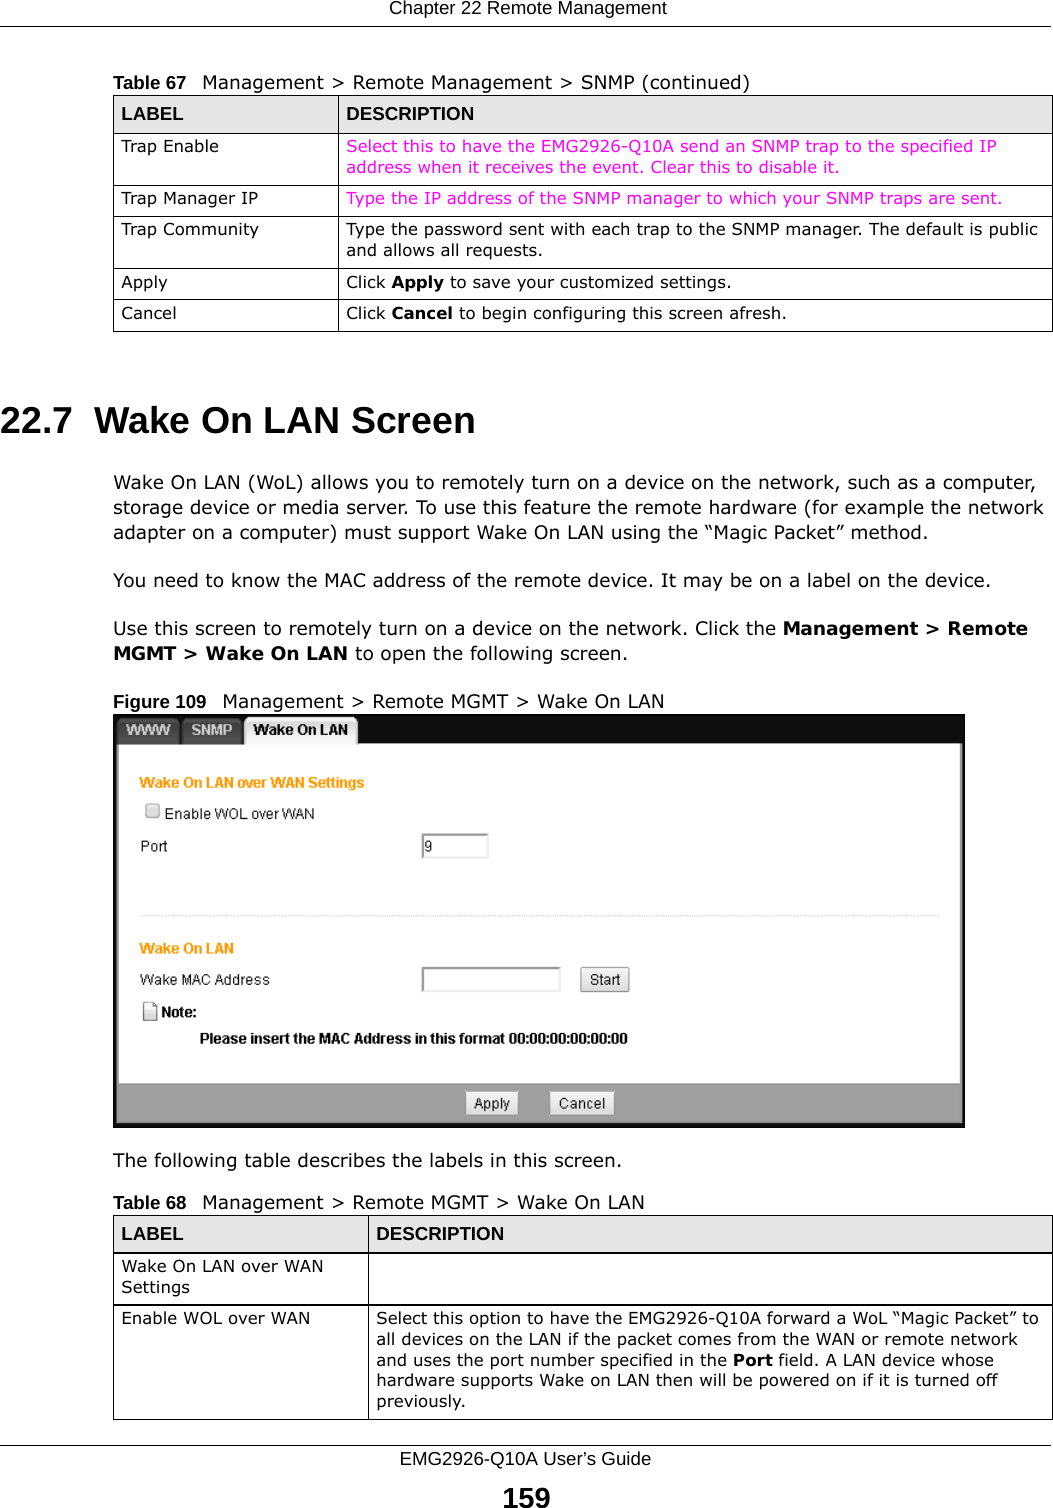  Chapter 22 Remote ManagementEMG2926-Q10A User’s Guide15922.7  Wake On LAN ScreenWake On LAN (WoL) allows you to remotely turn on a device on the network, such as a computer, storage device or media server. To use this feature the remote hardware (for example the network adapter on a computer) must support Wake On LAN using the “Magic Packet” method. You need to know the MAC address of the remote device. It may be on a label on the device.Use this screen to remotely turn on a device on the network. Click the Management &gt; Remote MGMT &gt; Wake On LAN to open the following screen.Figure 109   Management &gt; Remote MGMT &gt; Wake On LAN The following table describes the labels in this screen. Trap Enable Select this to have the EMG2926-Q10A send an SNMP trap to the specified IP address when it receives the event. Clear this to disable it.Trap Manager IP Type the IP address of the SNMP manager to which your SNMP traps are sent.Trap Community Type the password sent with each trap to the SNMP manager. The default is public and allows all requests.Apply Click Apply to save your customized settings. Cancel Click Cancel to begin configuring this screen afresh.Table 67   Management &gt; Remote Management &gt; SNMP (continued)LABEL DESCRIPTIONTable 68   Management &gt; Remote MGMT &gt; Wake On LANLABEL DESCRIPTIONWake On LAN over WAN Settings Enable WOL over WAN Select this option to have the EMG2926-Q10A forward a WoL “Magic Packet” to all devices on the LAN if the packet comes from the WAN or remote network and uses the port number specified in the Port field. A LAN device whose hardware supports Wake on LAN then will be powered on if it is turned off previously.